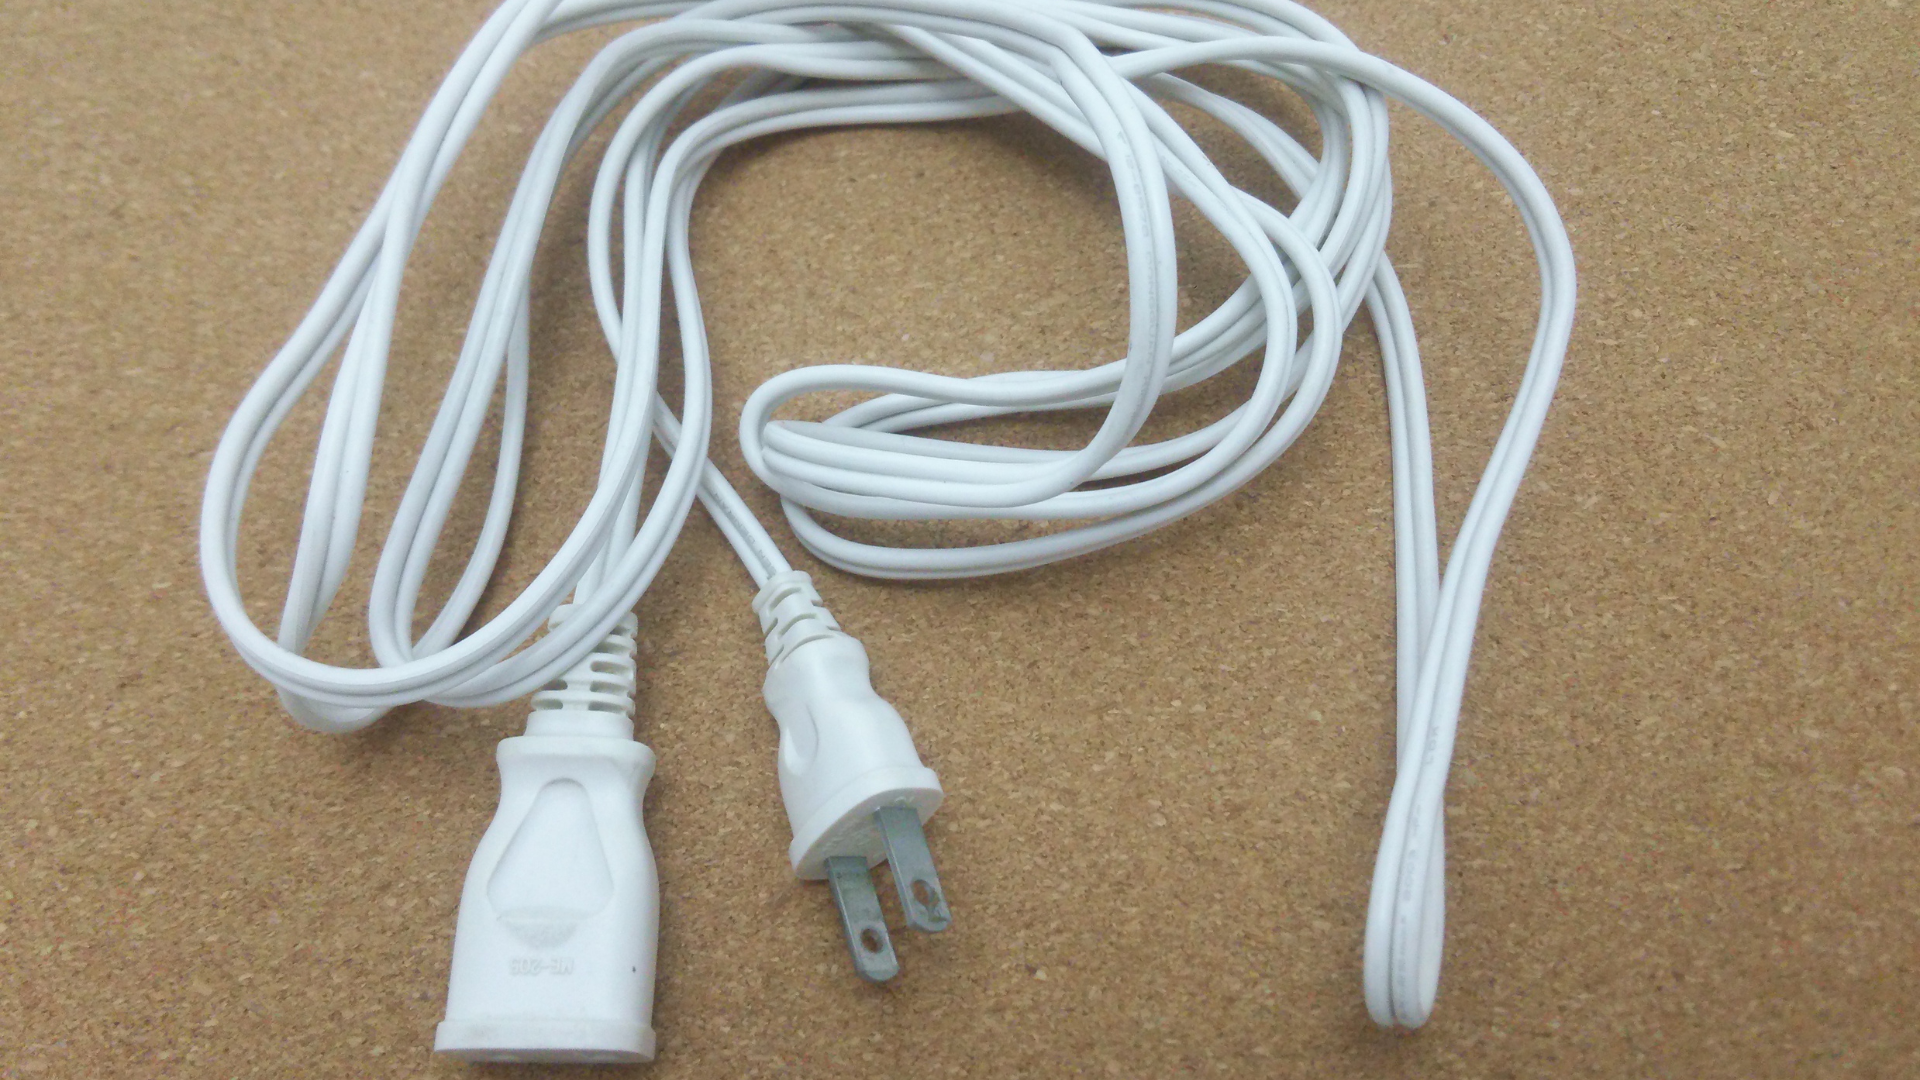 Extension cords are one of the overlooked potential hazards during the holidays a Utah fire officia...